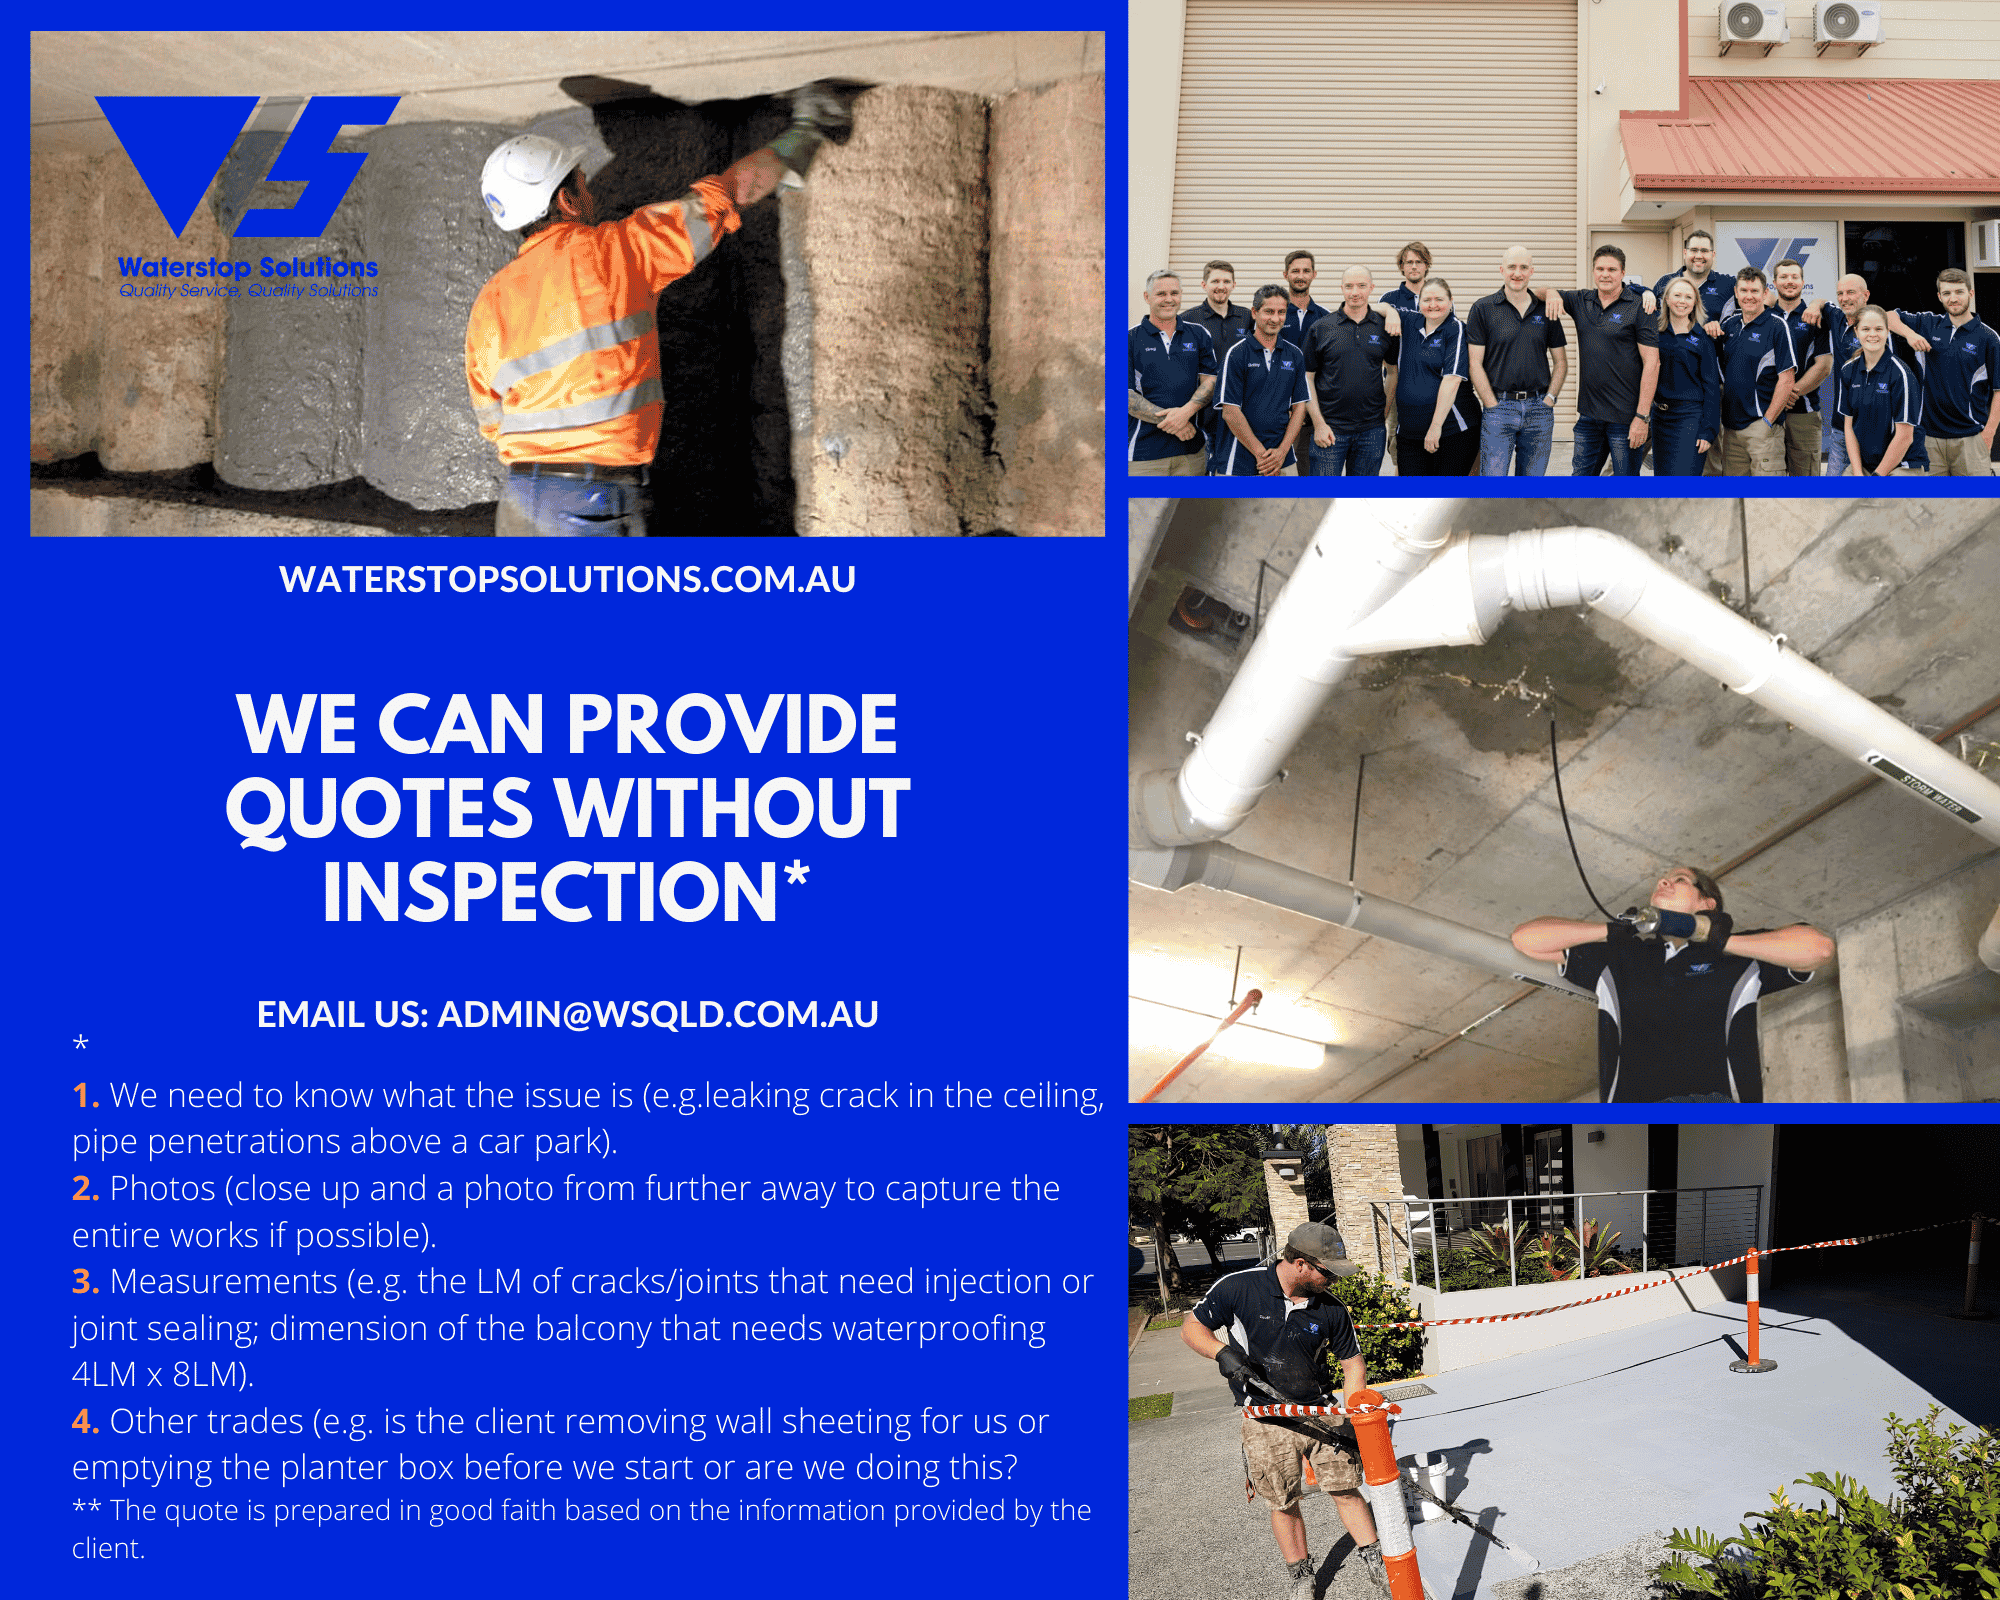 Email quotes without inspection - Waterstop Solutions